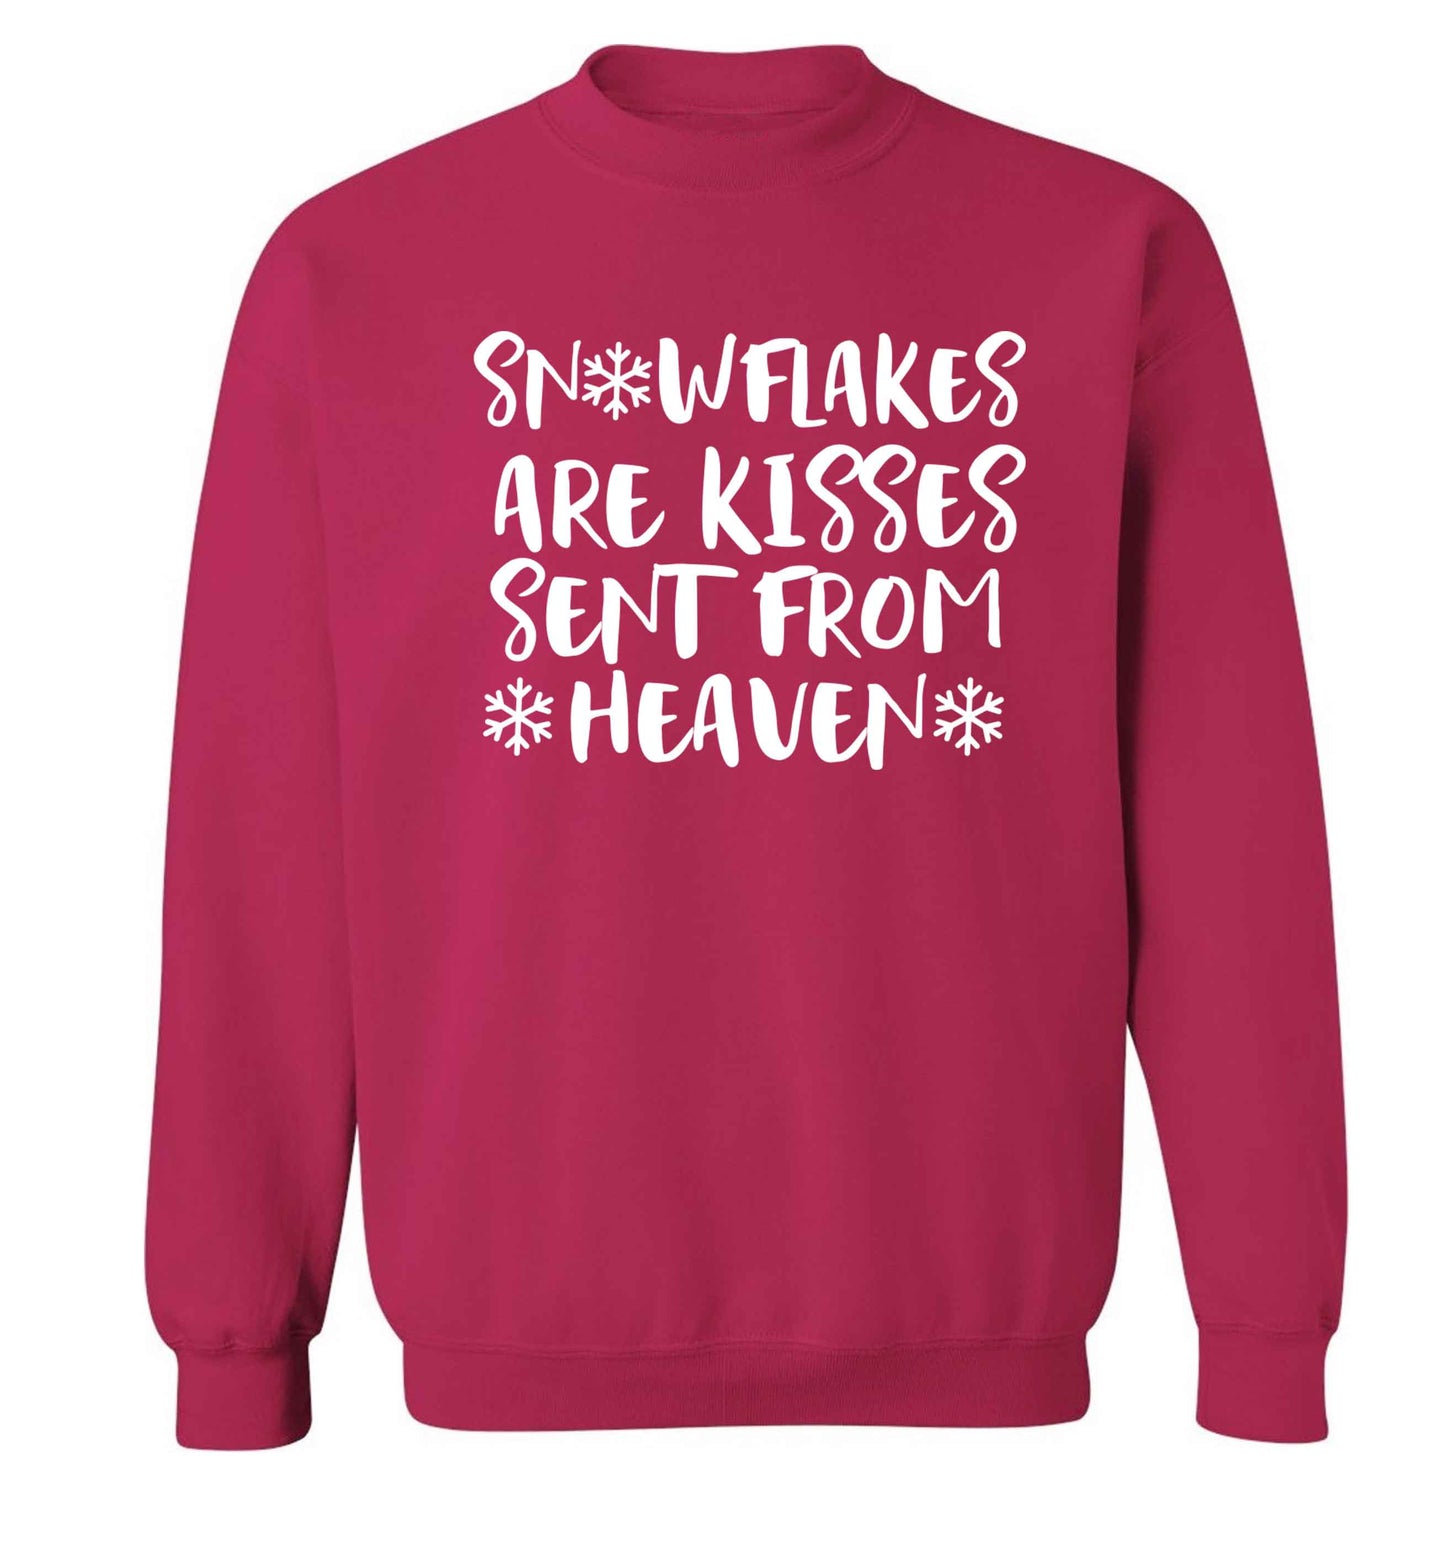 Snowflakes are kisses sent from heaven Adult's unisex pink Sweater 2XL